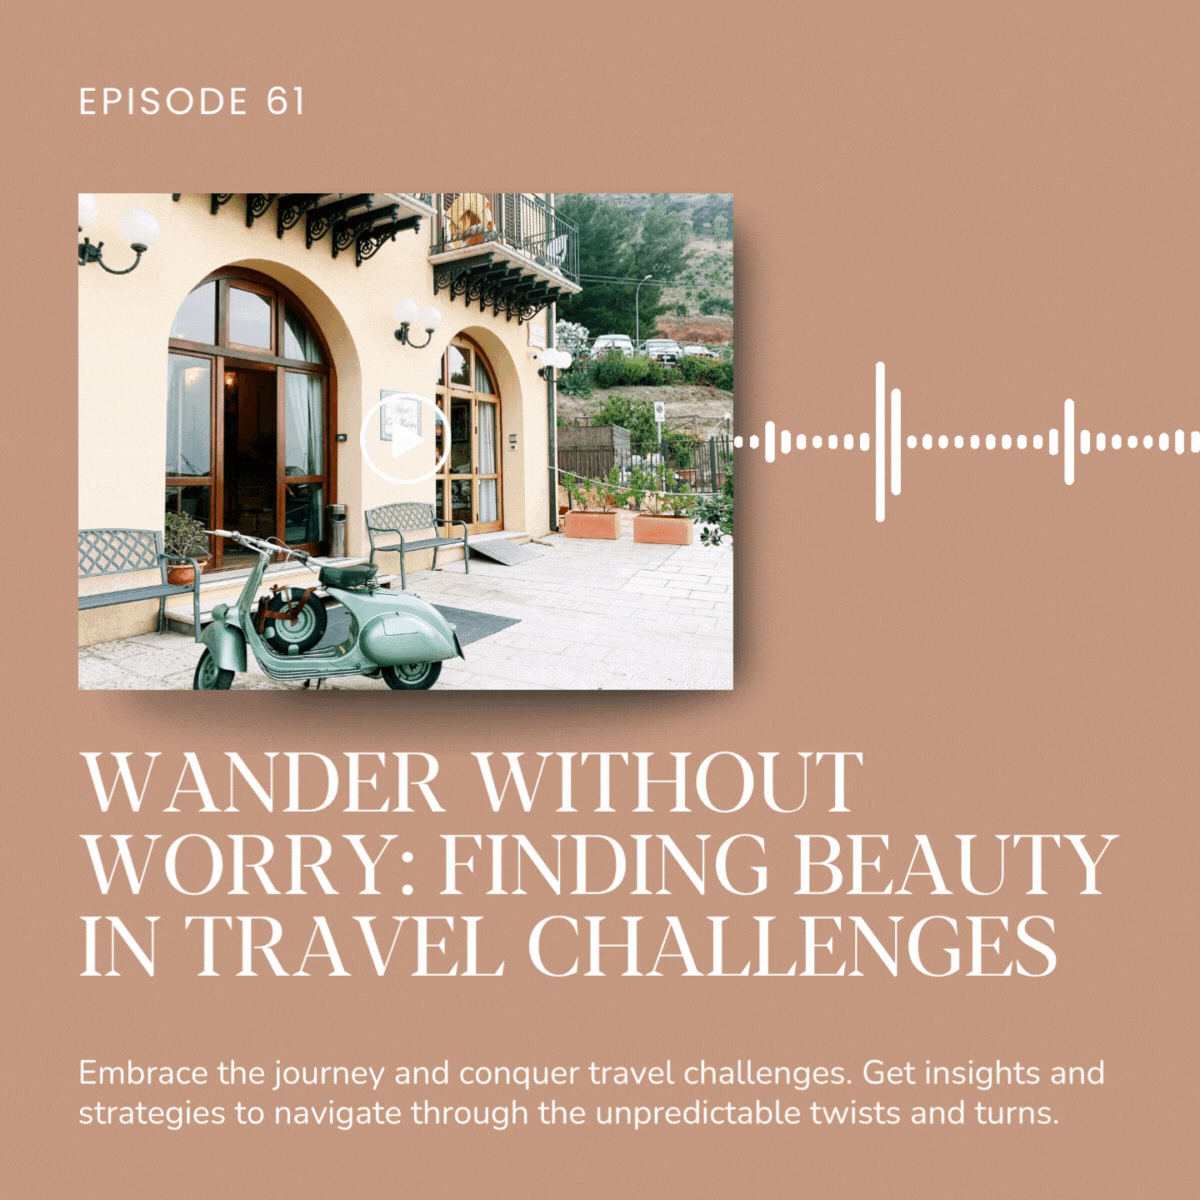 Embrace the journey and conquer travel challenges. Get insights and strategies to navigate through the unpredictable twists and turns.